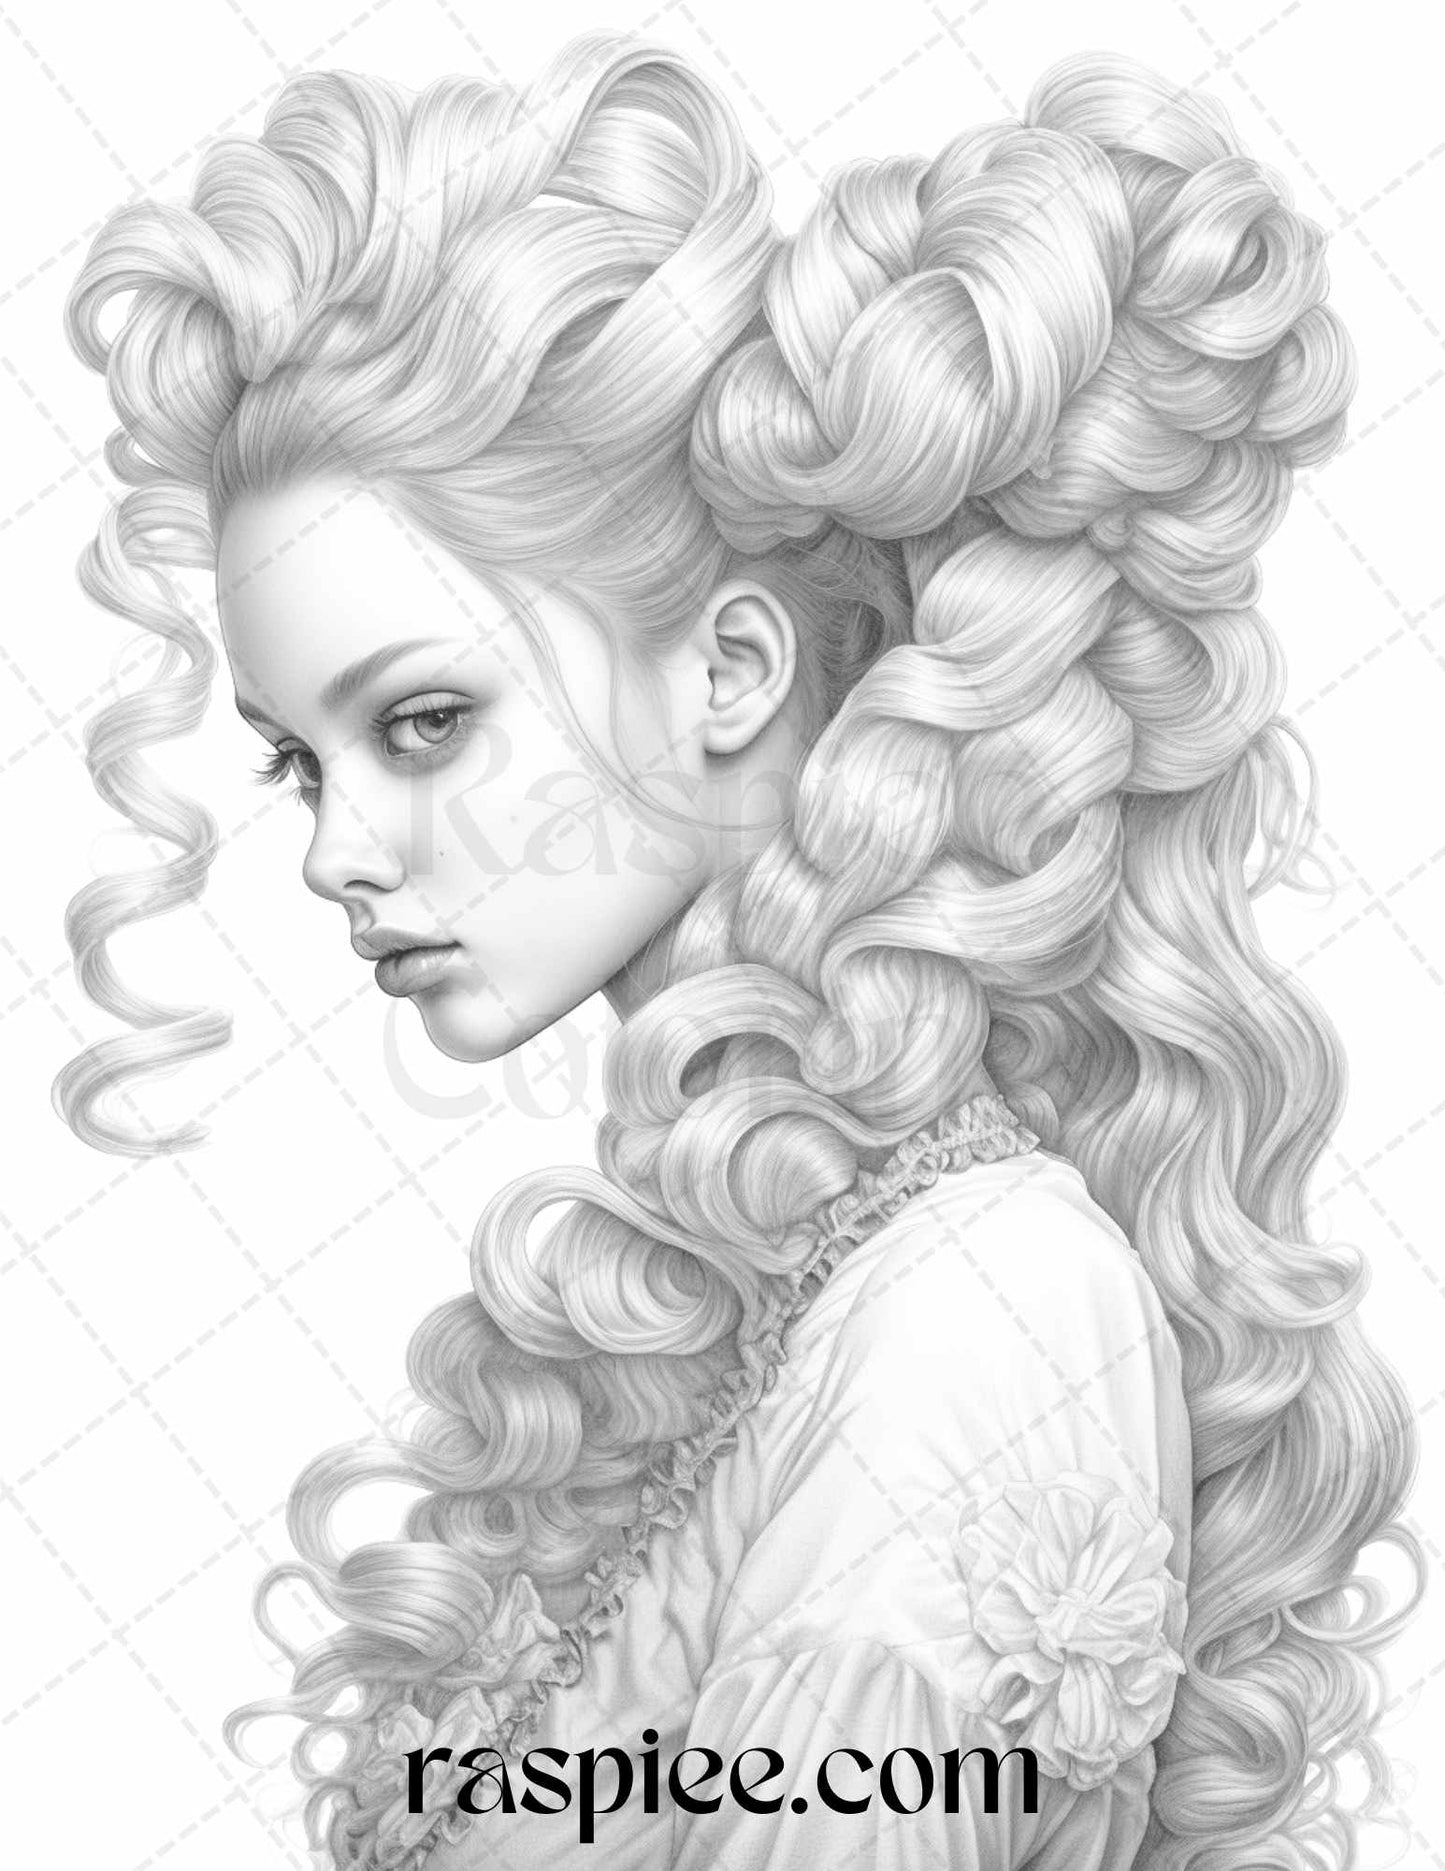 Grayscale coloring page of a beautiful hairstyle for adults, Printable grayscale art for stress relief and relaxation, Hairstyle coloring book page for creative therapy, Relaxing grayscale coloring activity for adults